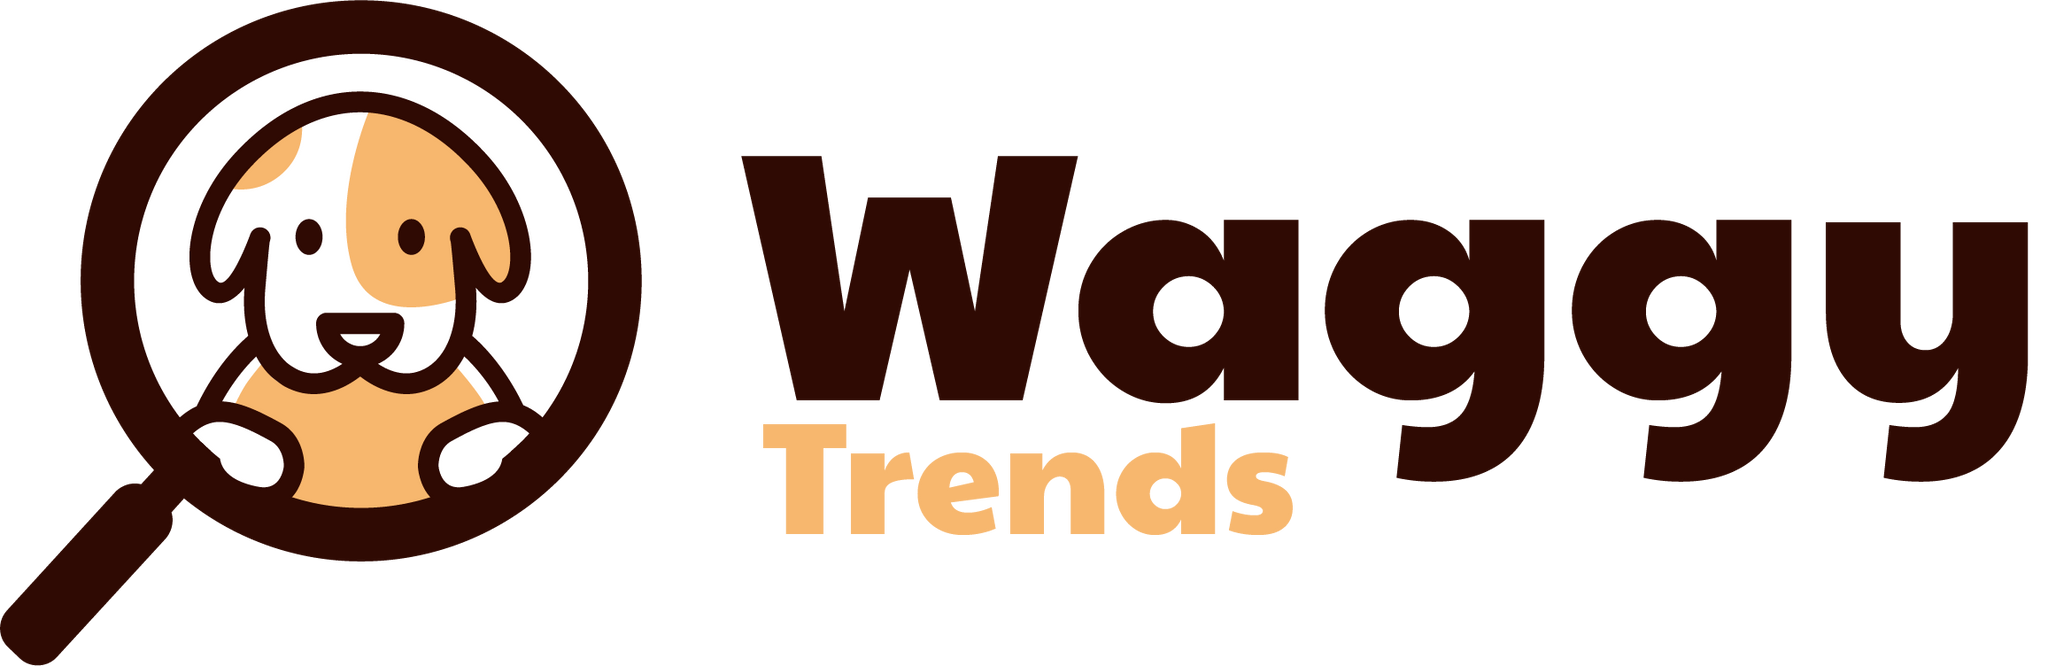 waggytrendsllc